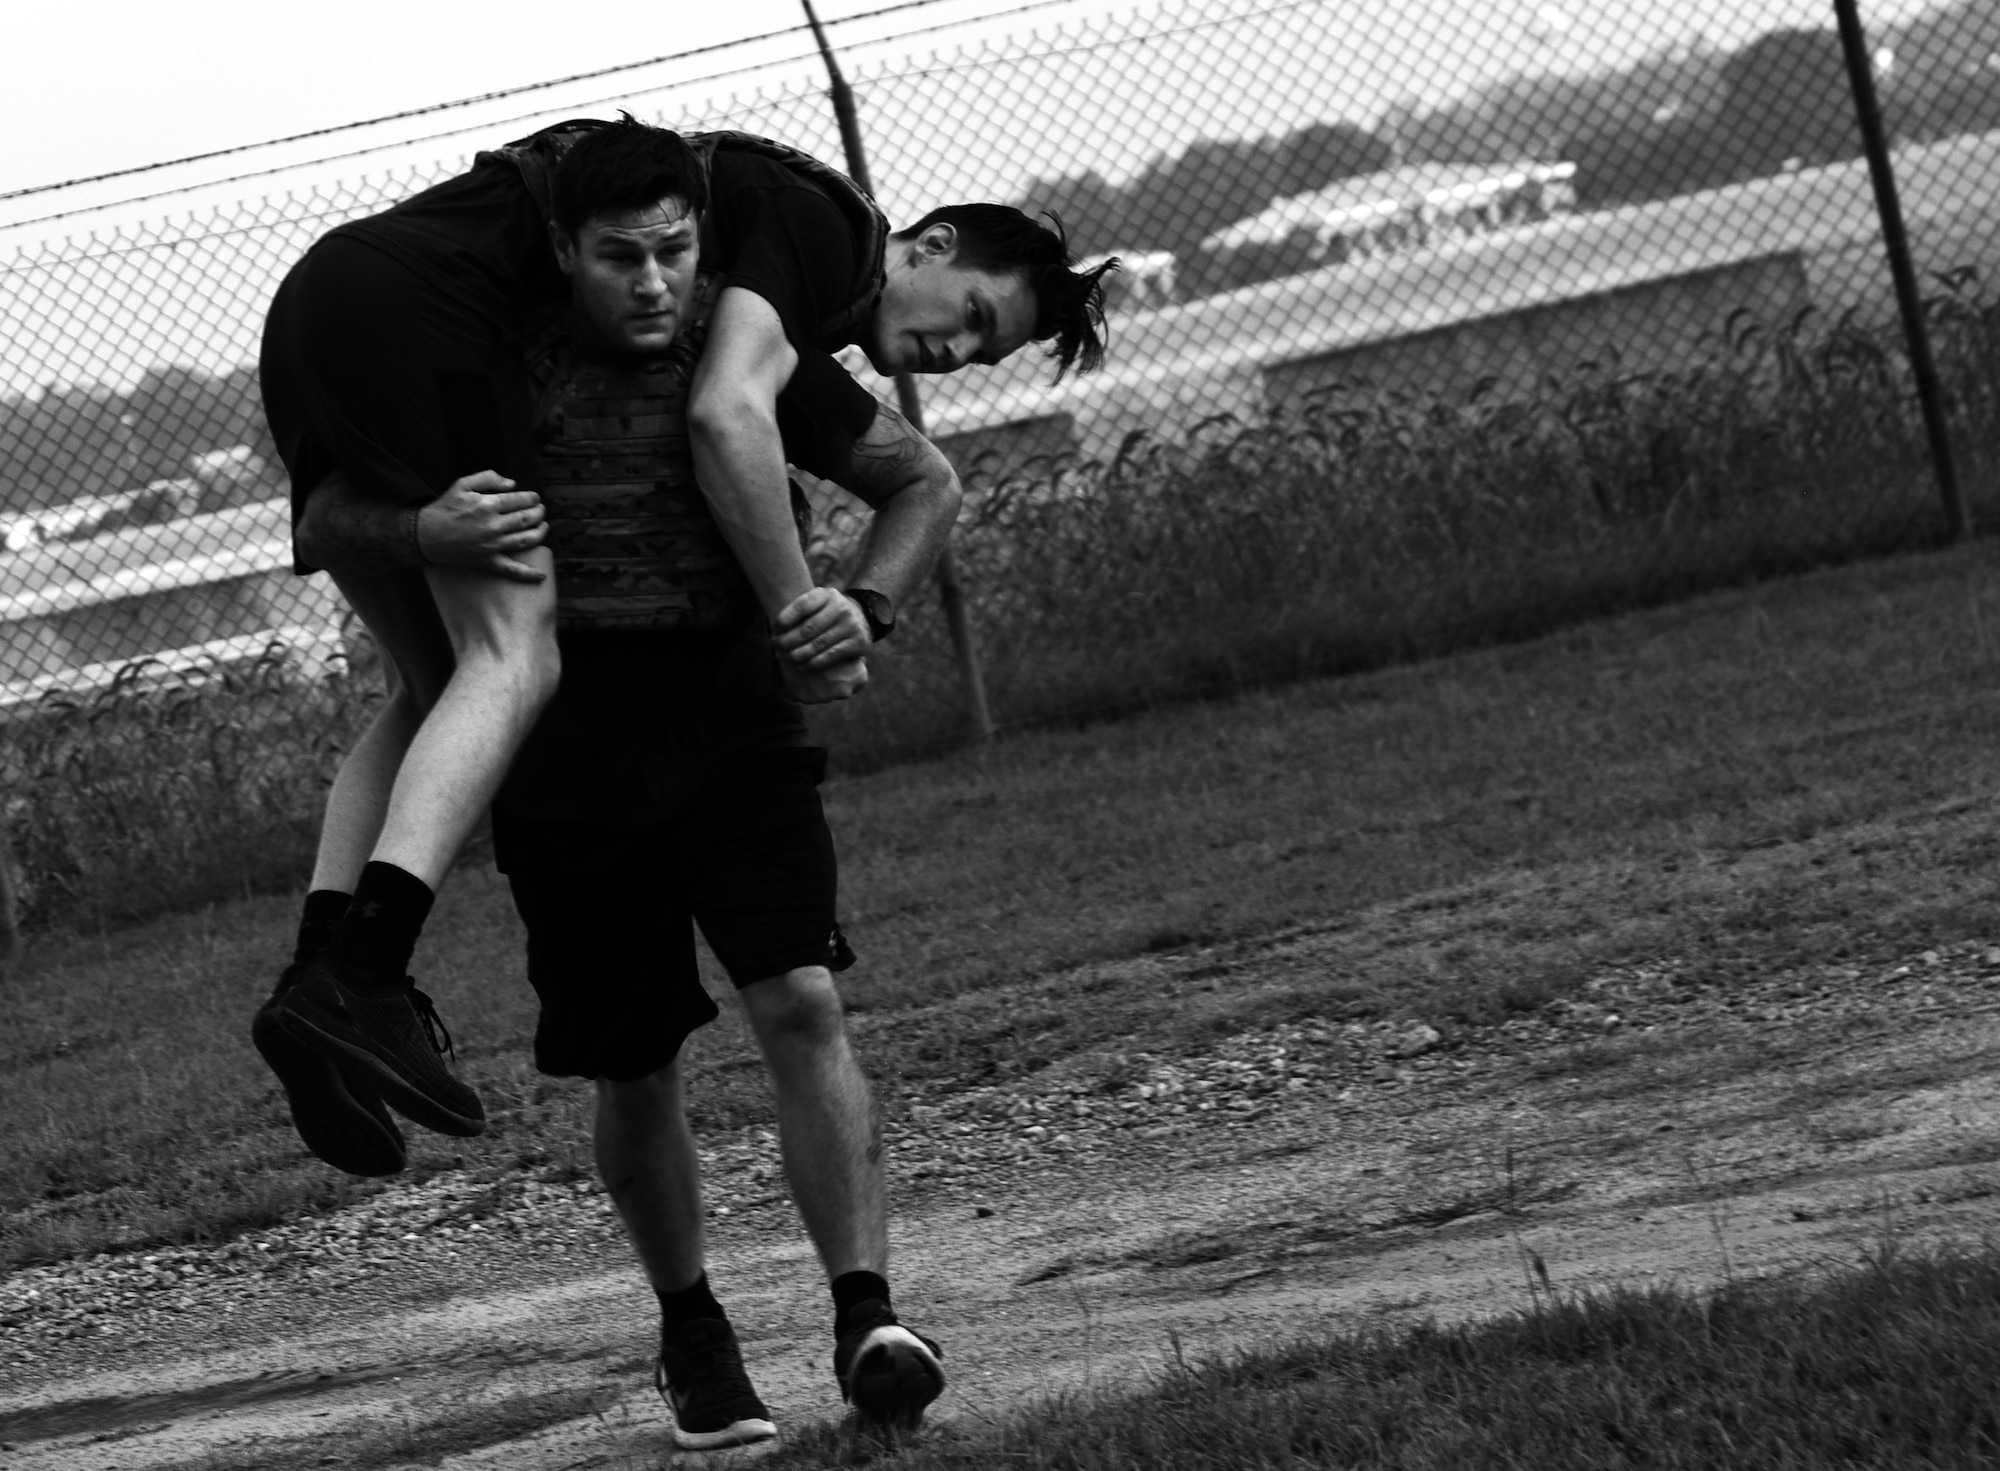 U.S. Air Force Staff Sgt. Jordan Massey, 20th Civil Engineer Squadron (CES) explosive ordnance disposal (EOD) craftsman, performs a fireman carry with Airman 1st Class Evan Cooling, 20th CES EOD apprentice, over his shoulders during physical training at Shaw Air Force Base, S.C., July 19, 2018.